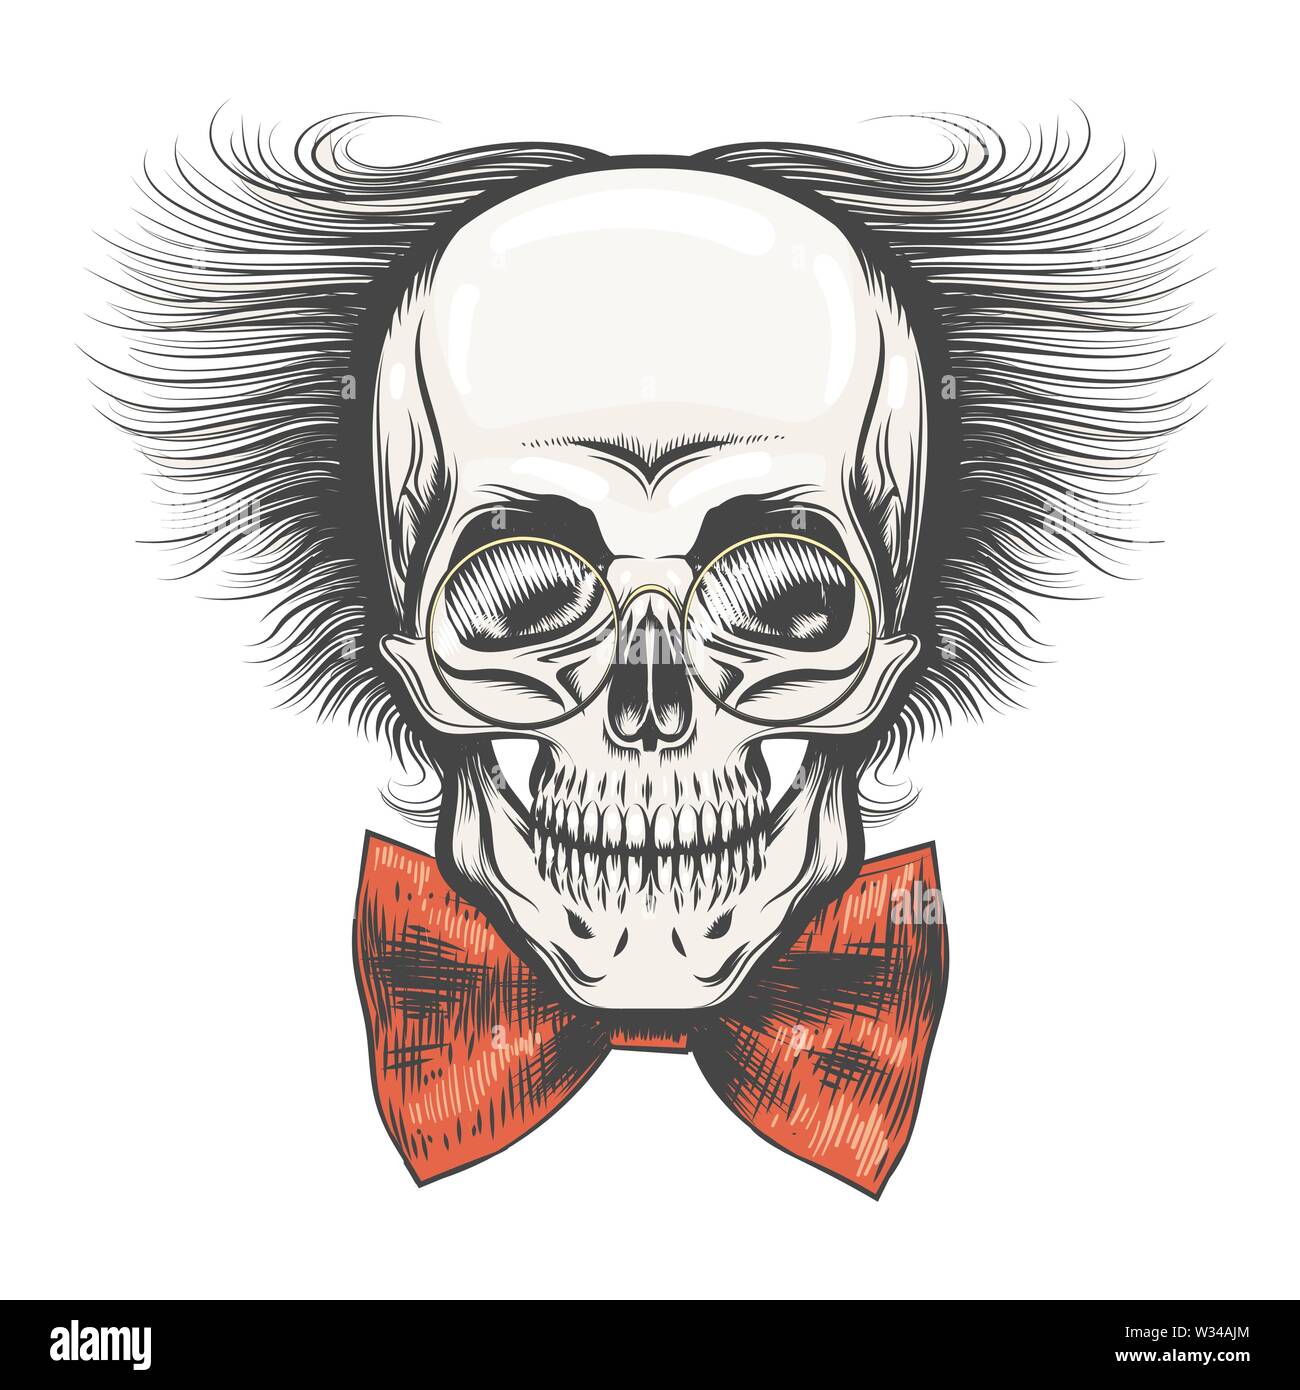 Human Skull in Professor glasses and Red bow tie drawn in tattoo style. Vector illustration. Stock Vector